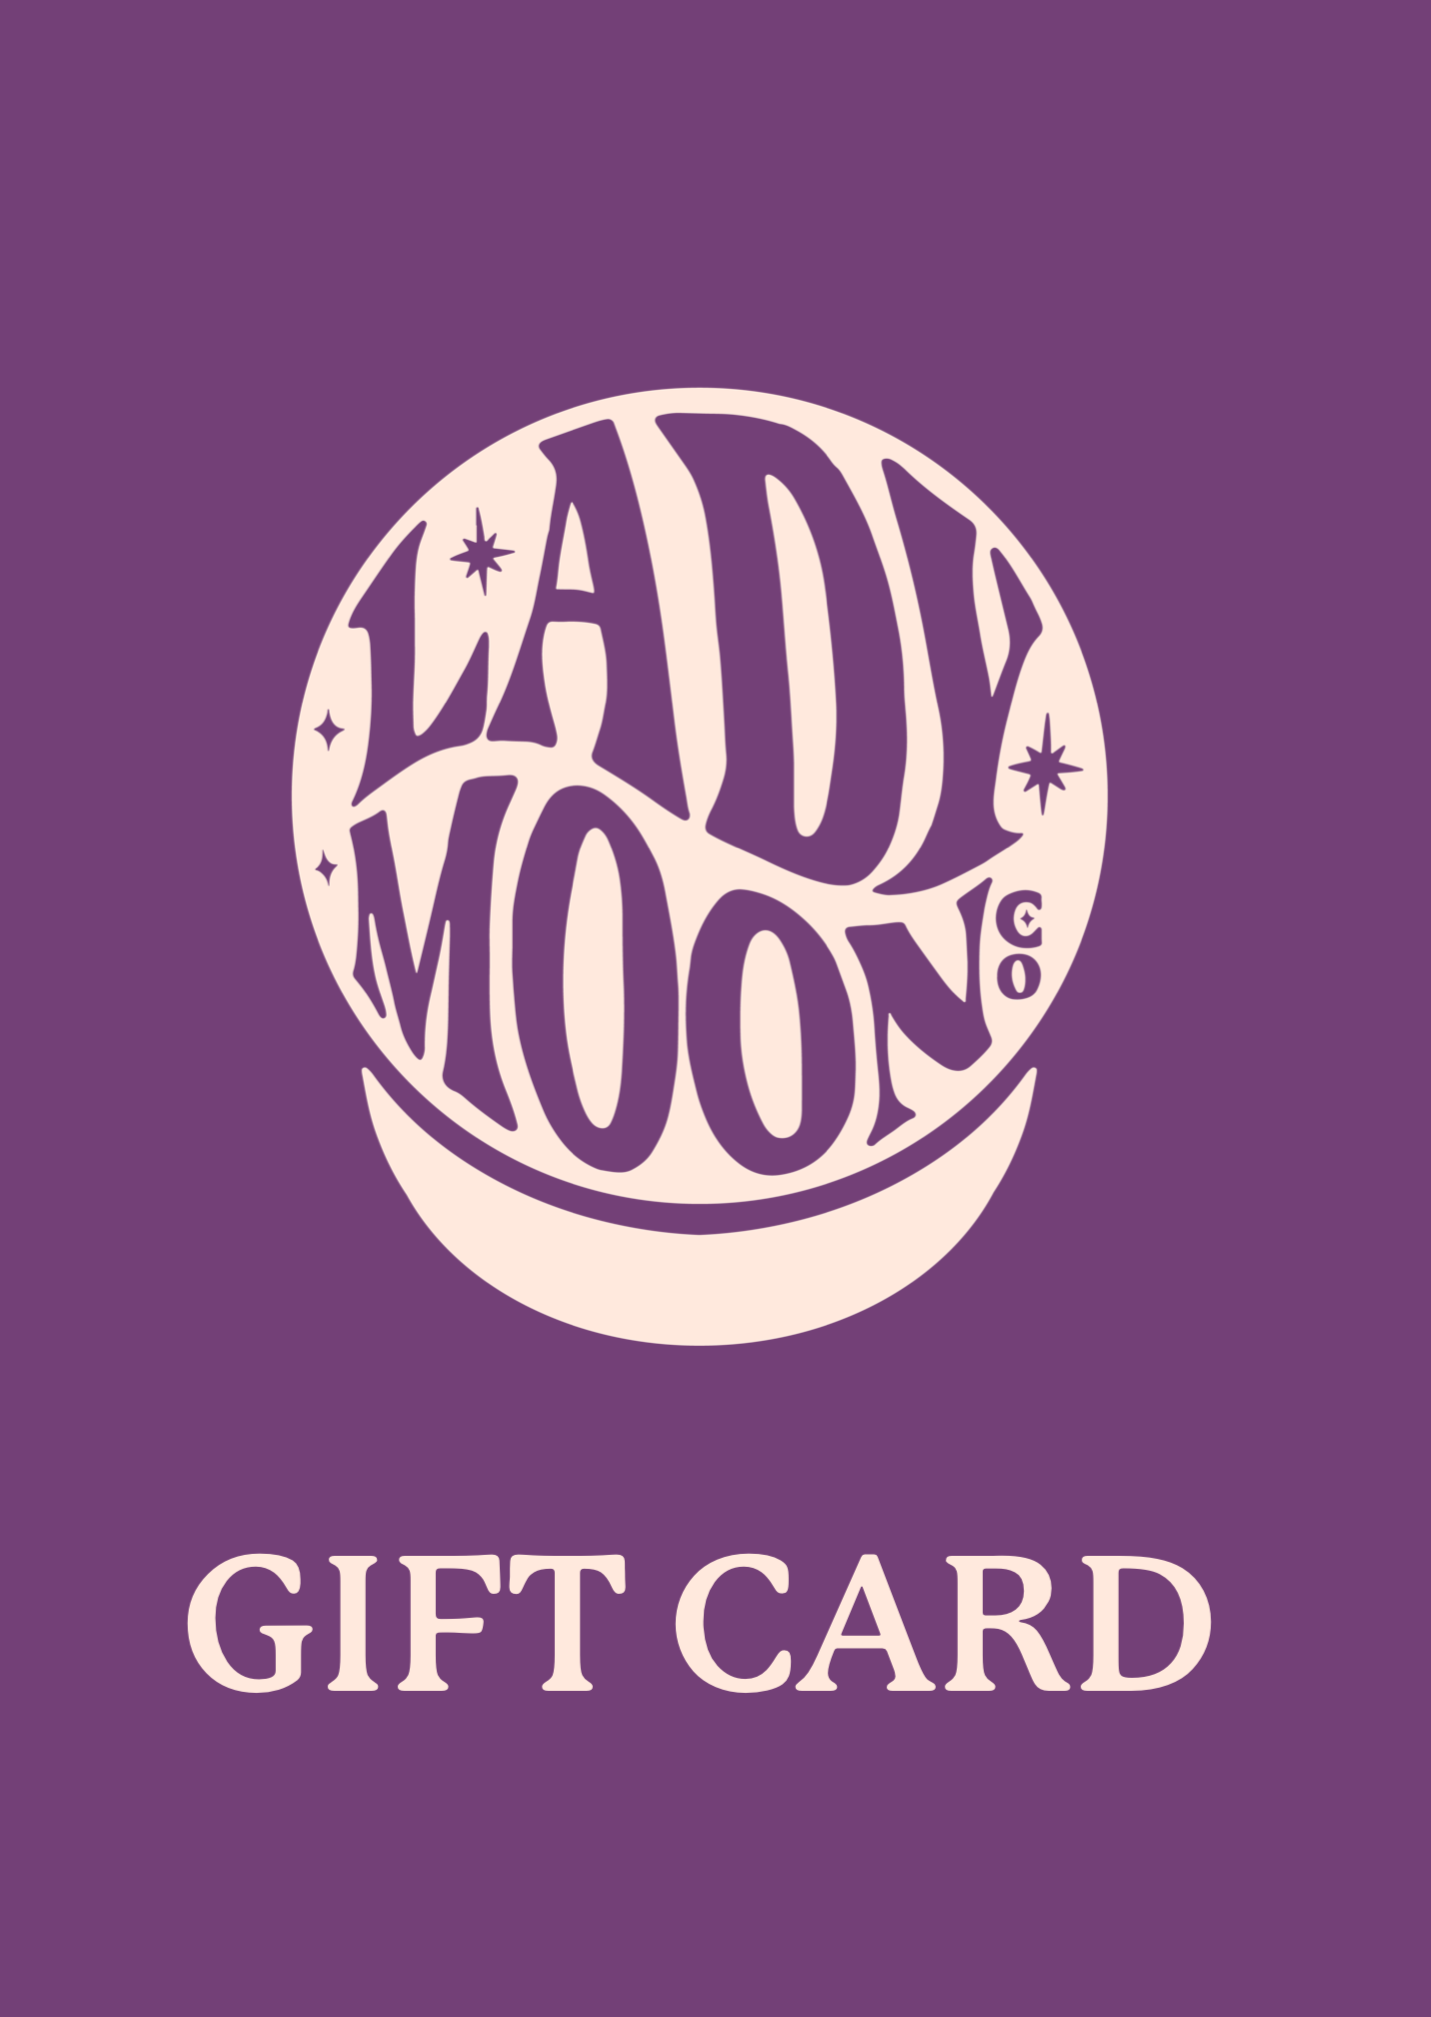 LADY MOON CO. GIFT CARD